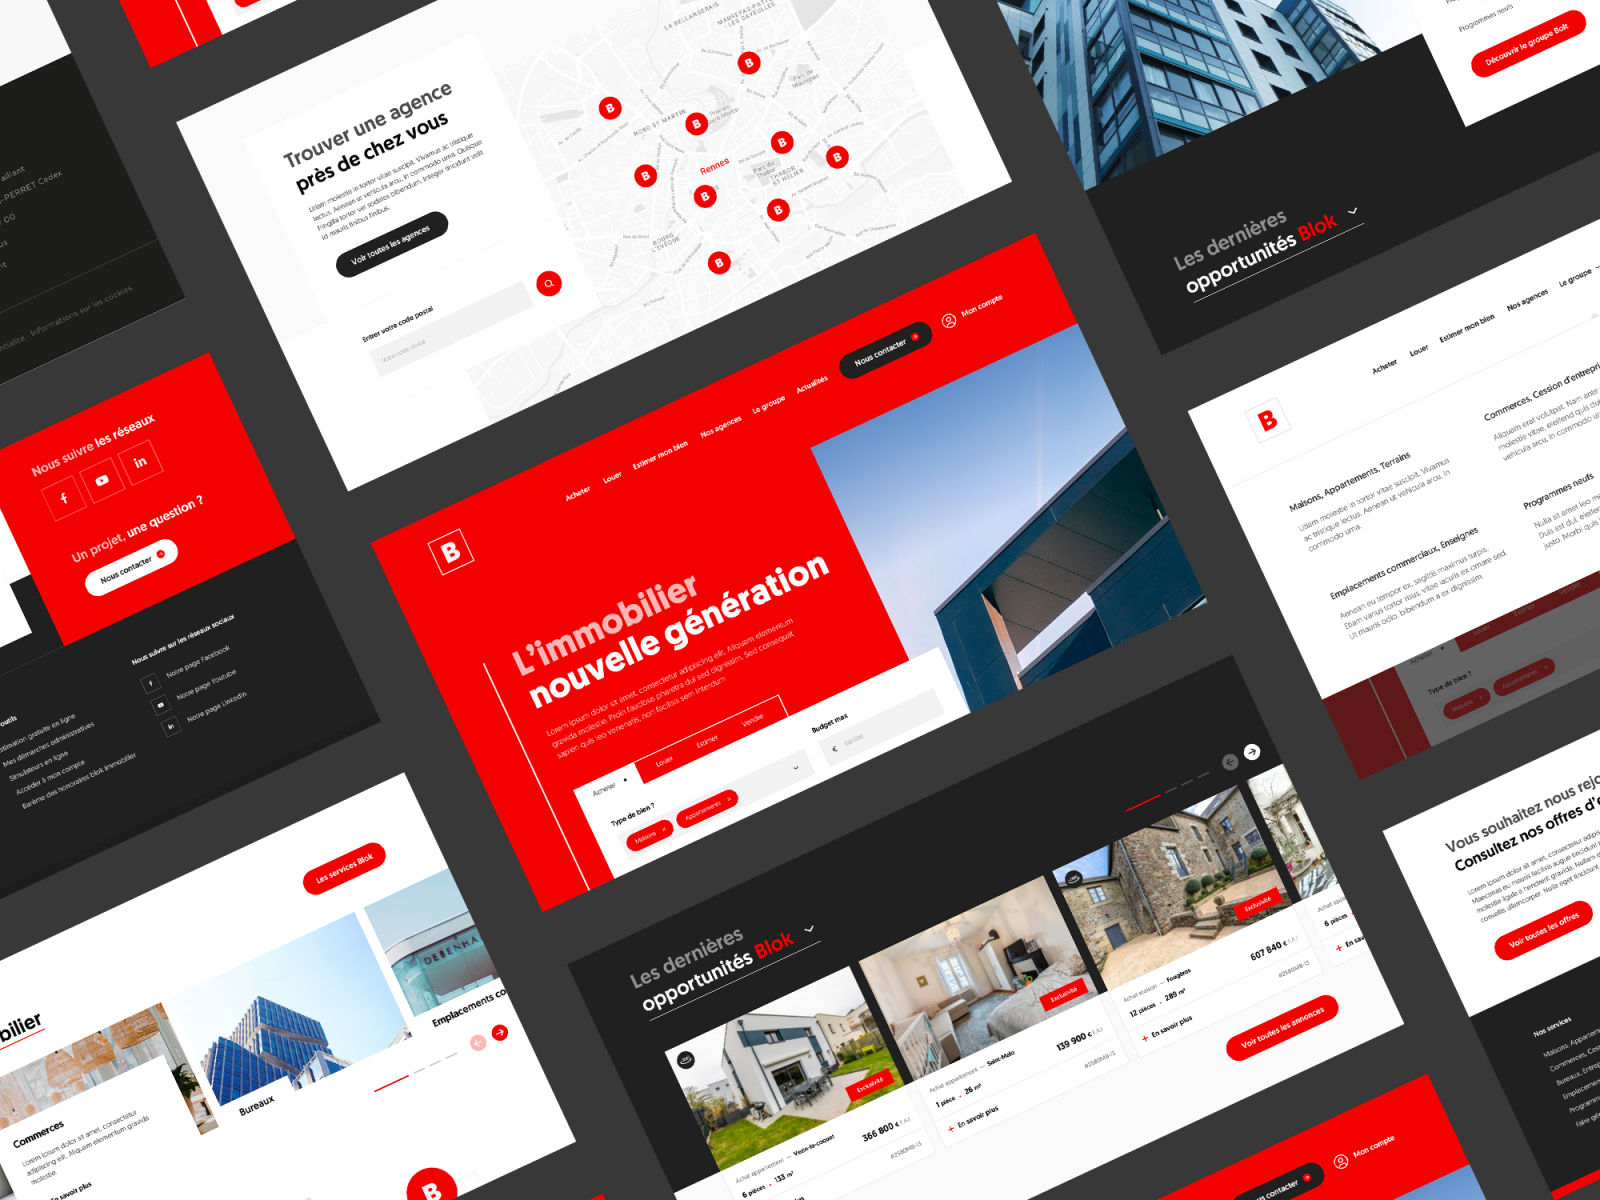 Blok — Refonte groupe immobilier by Undefined on Dribbble